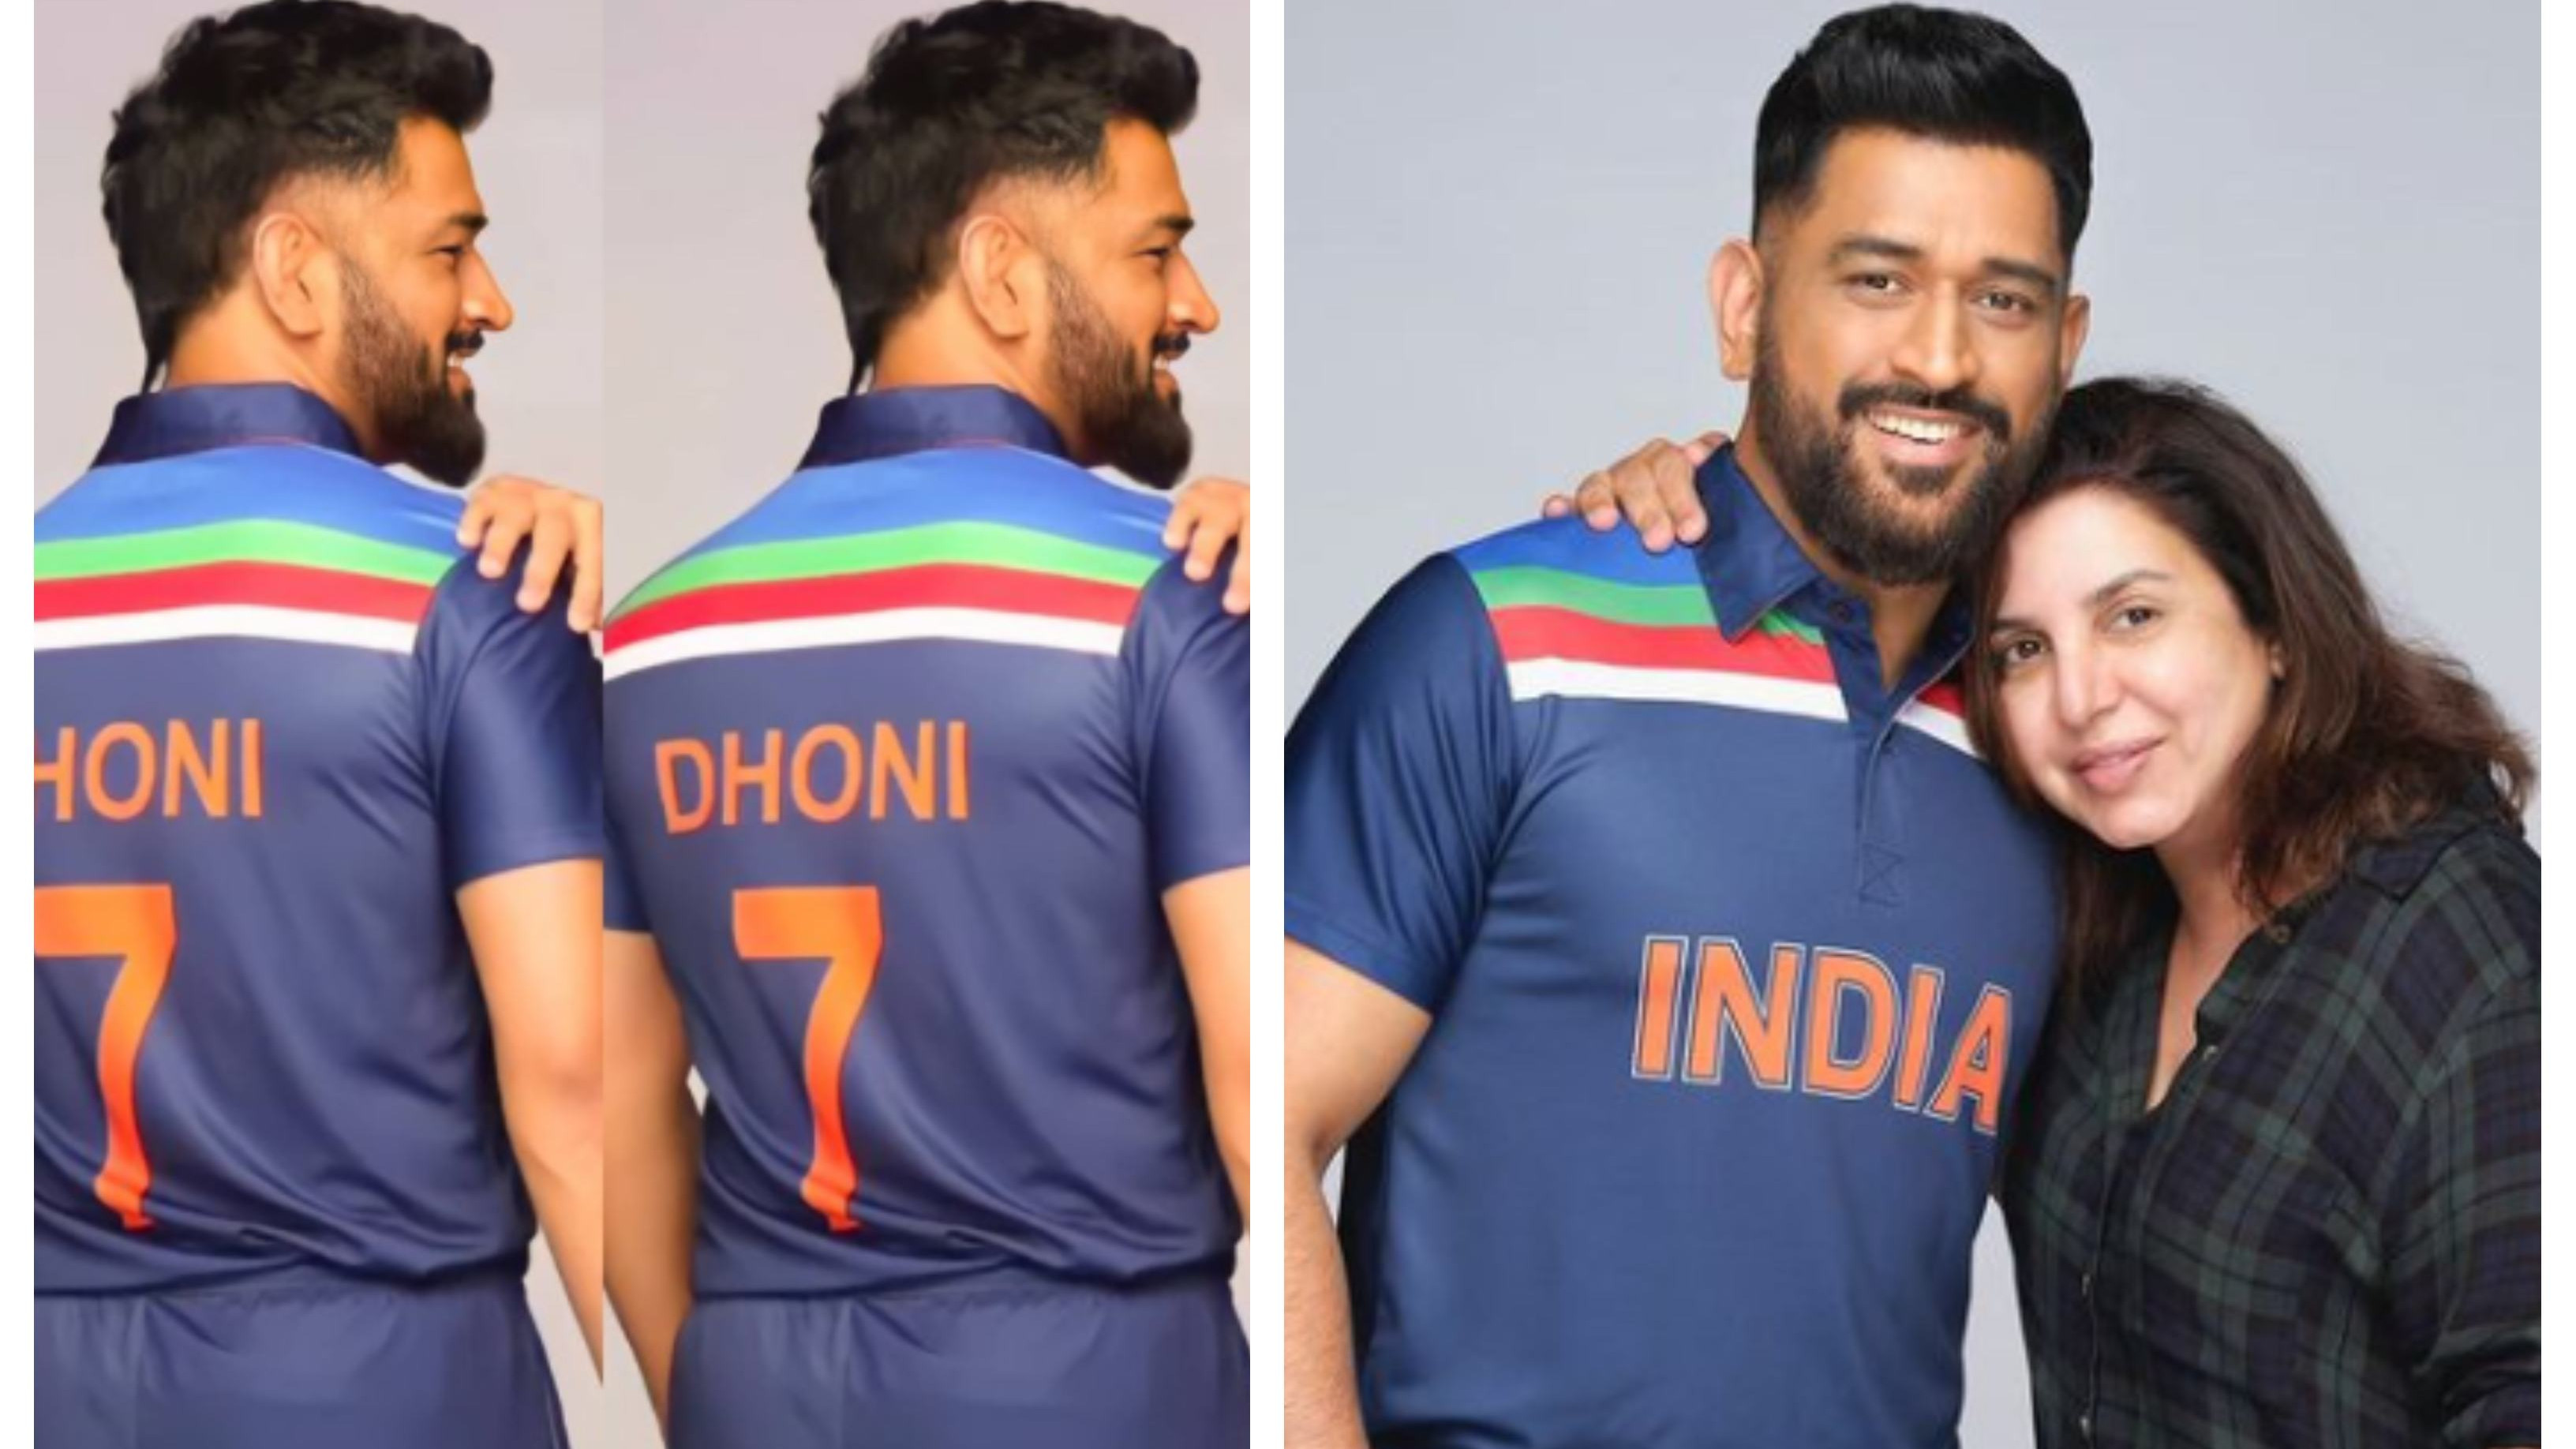 MS Dhoni dons Team India’s retro jersey during an advertisement shoot; pictures go viral